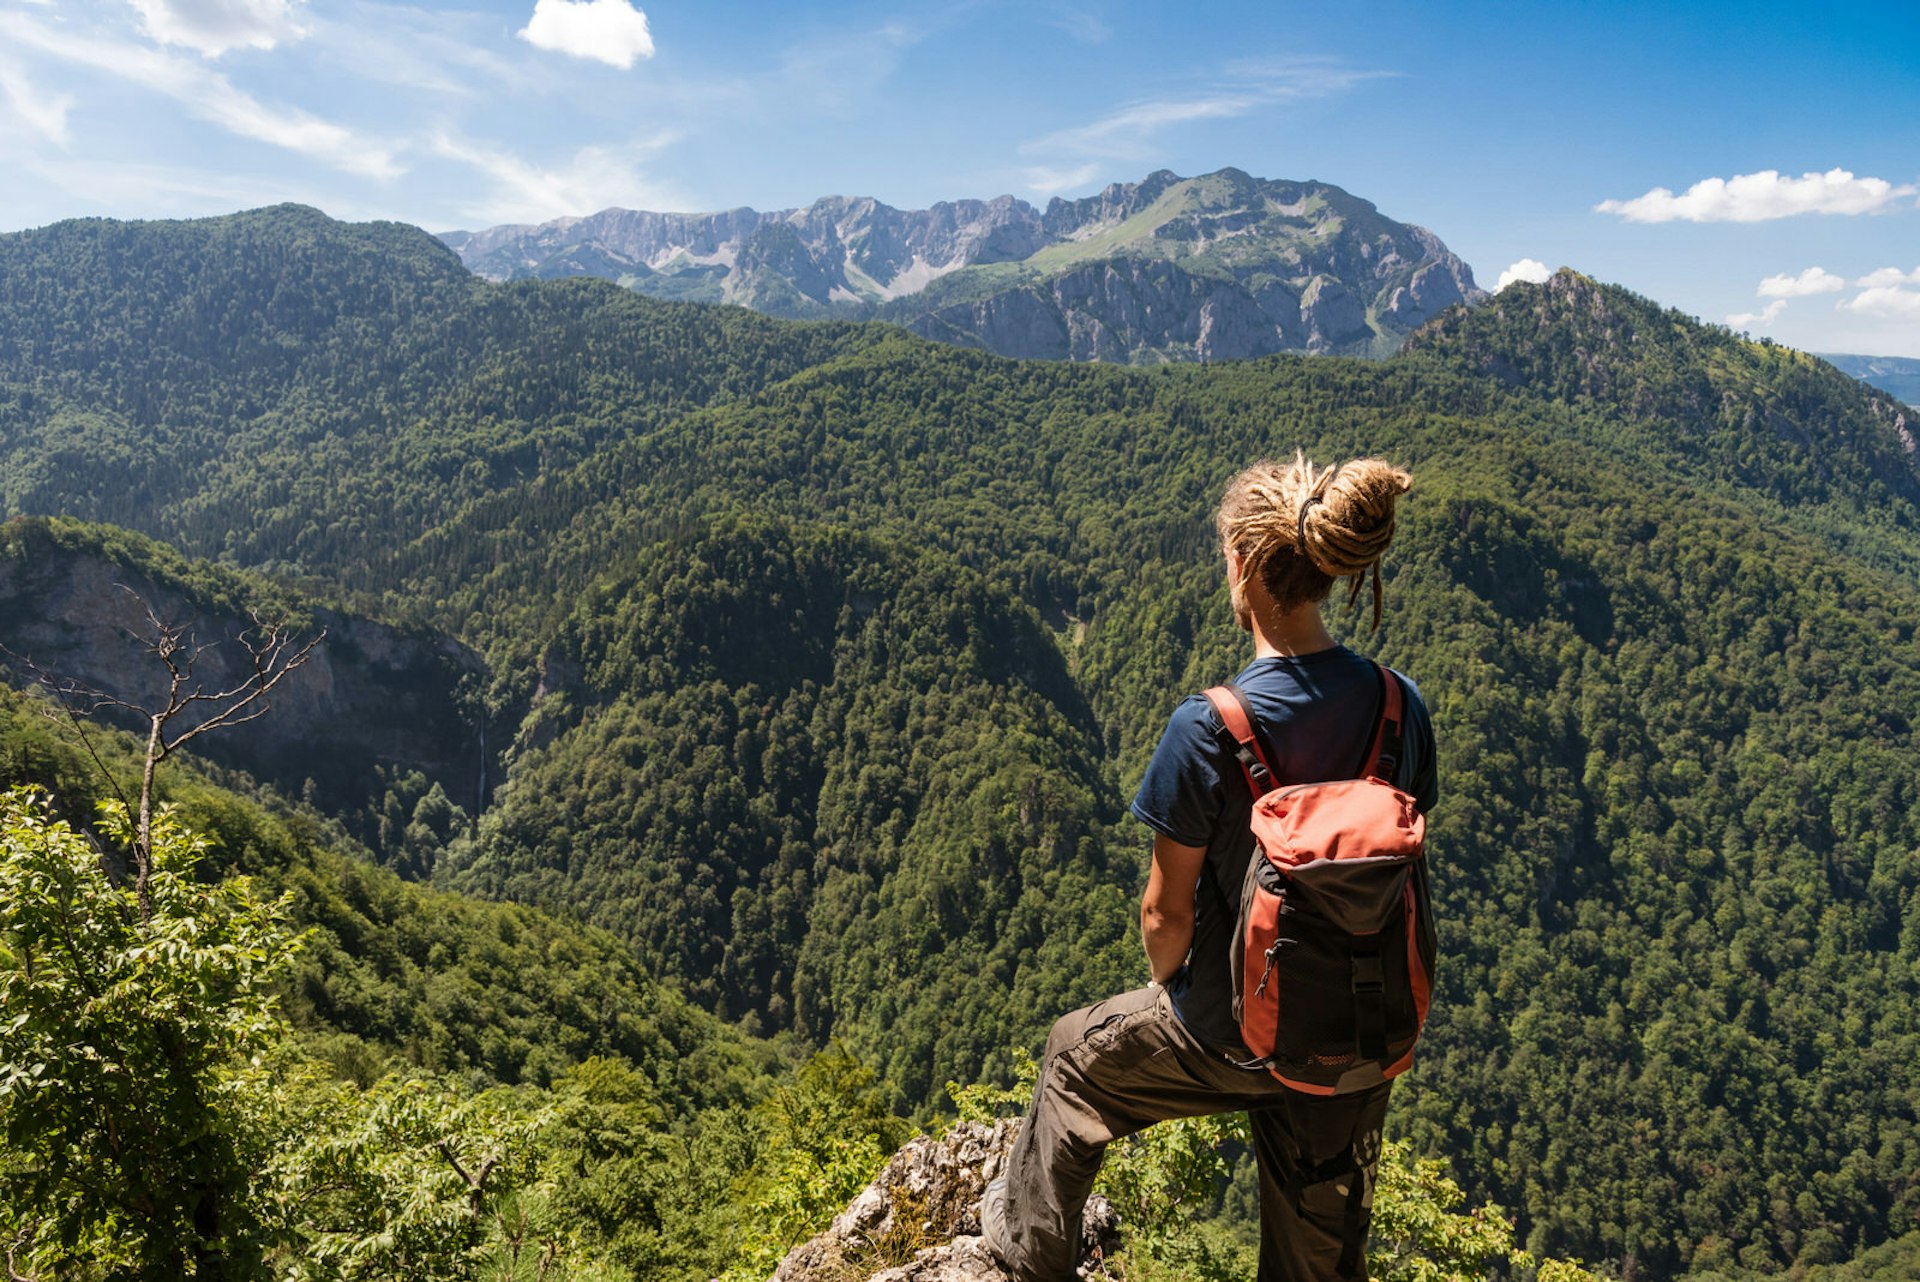 A hiker stands observing a view of a pristine forest, with craggy mountains in the background